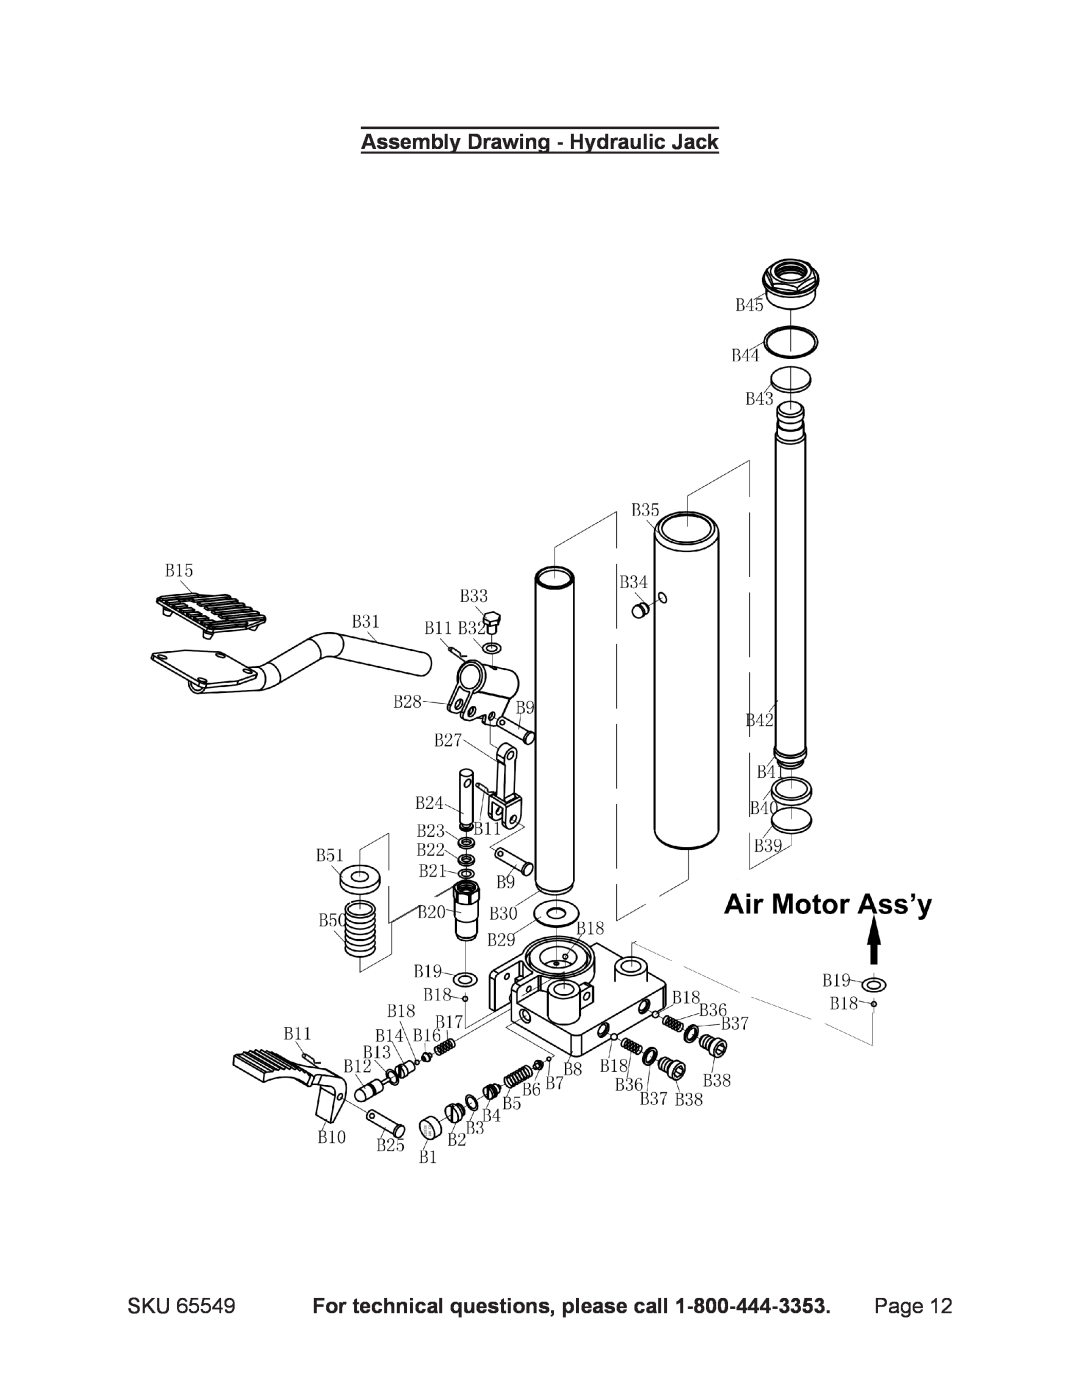 Harbor Freight Tools 65549 manual Assembly Drawing - Hydraulic Jack, For technical questions, please call, Page 